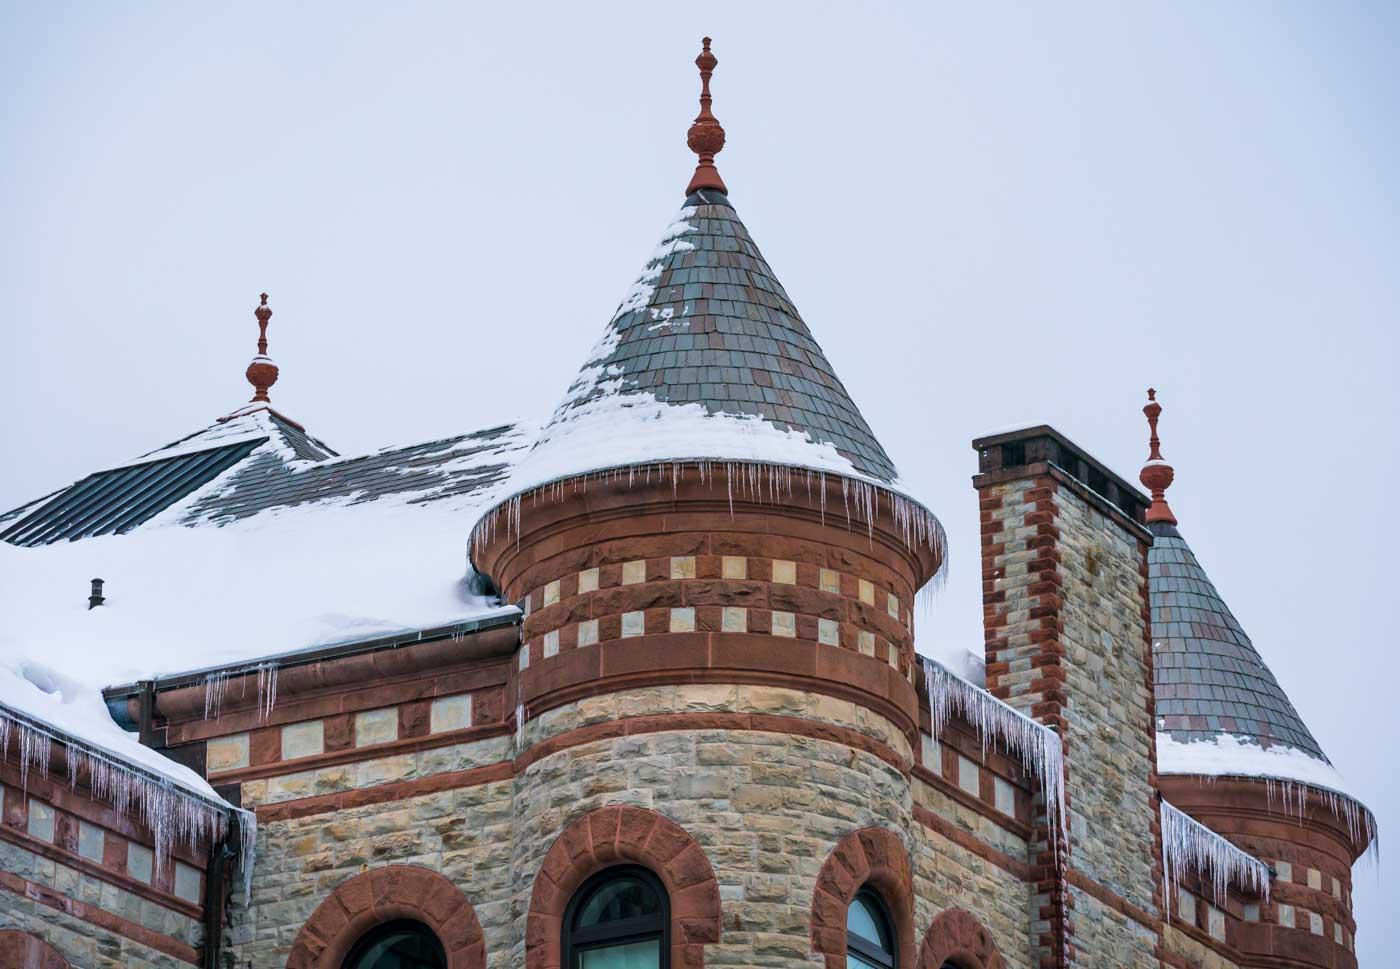 James B. Colgate Hall crusted with snow and ice